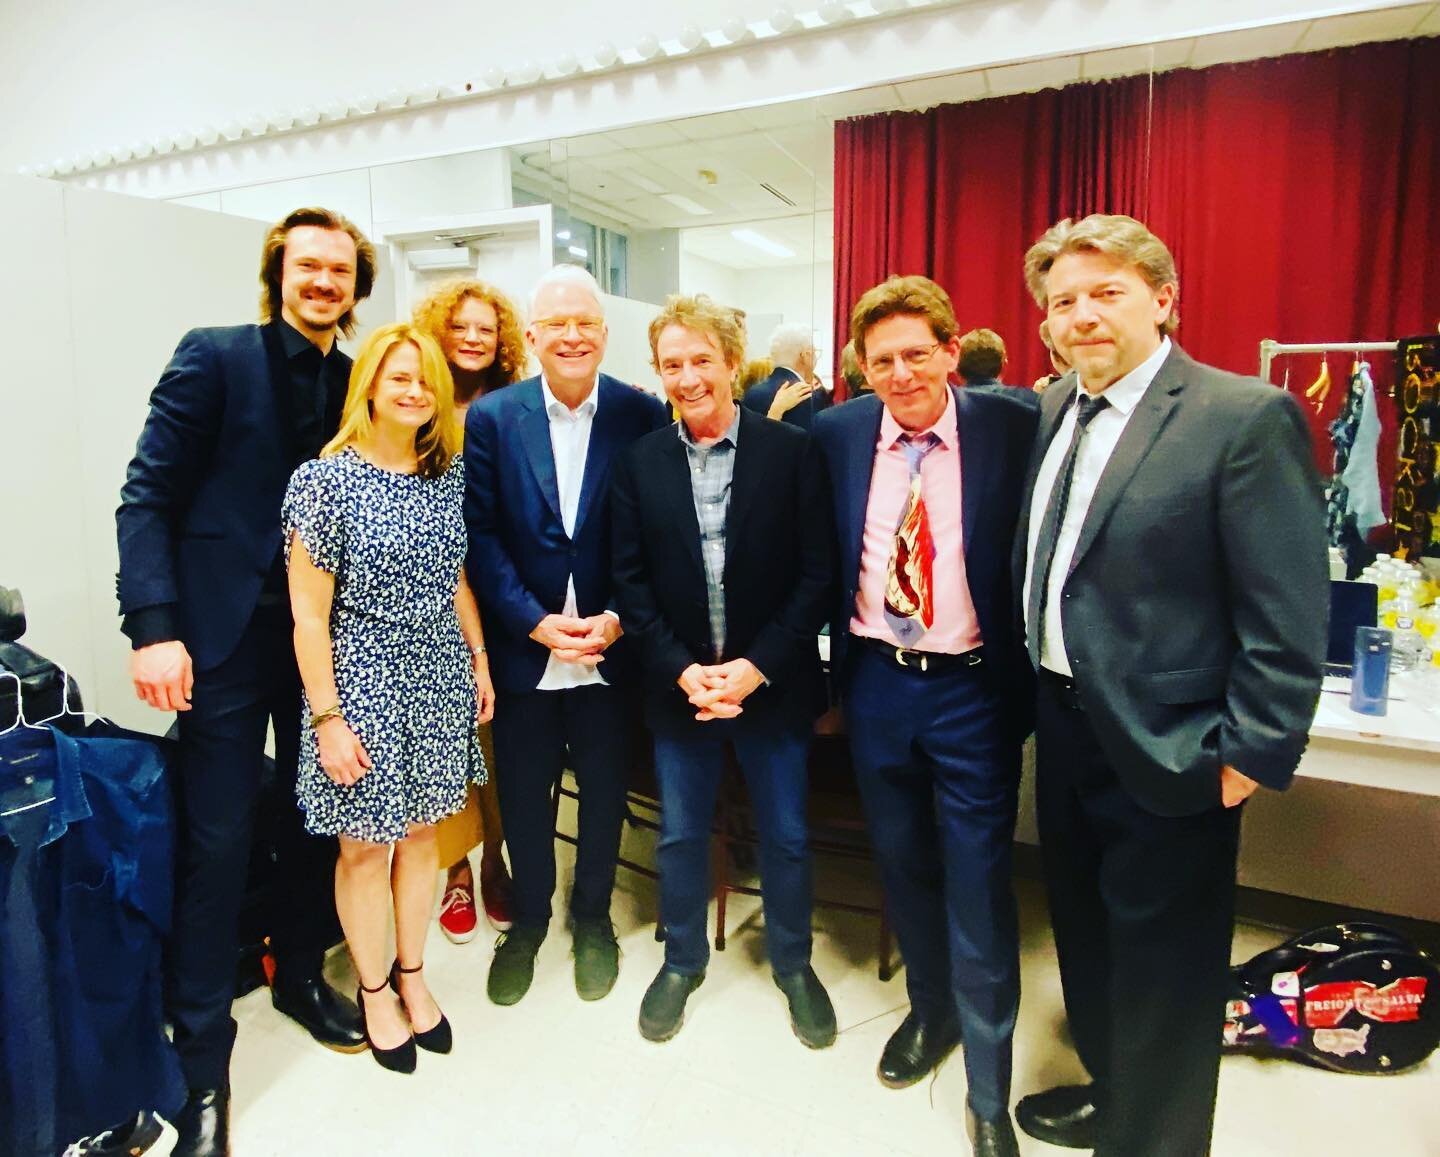 Last weekend, Forrest got to meet and perform with two iconic entertainers, Steve Martin and Martin Short. It was amazing spending some time around them, and as many of you probably know, Steve is a heck of a banjo player! It was also an honor to fin